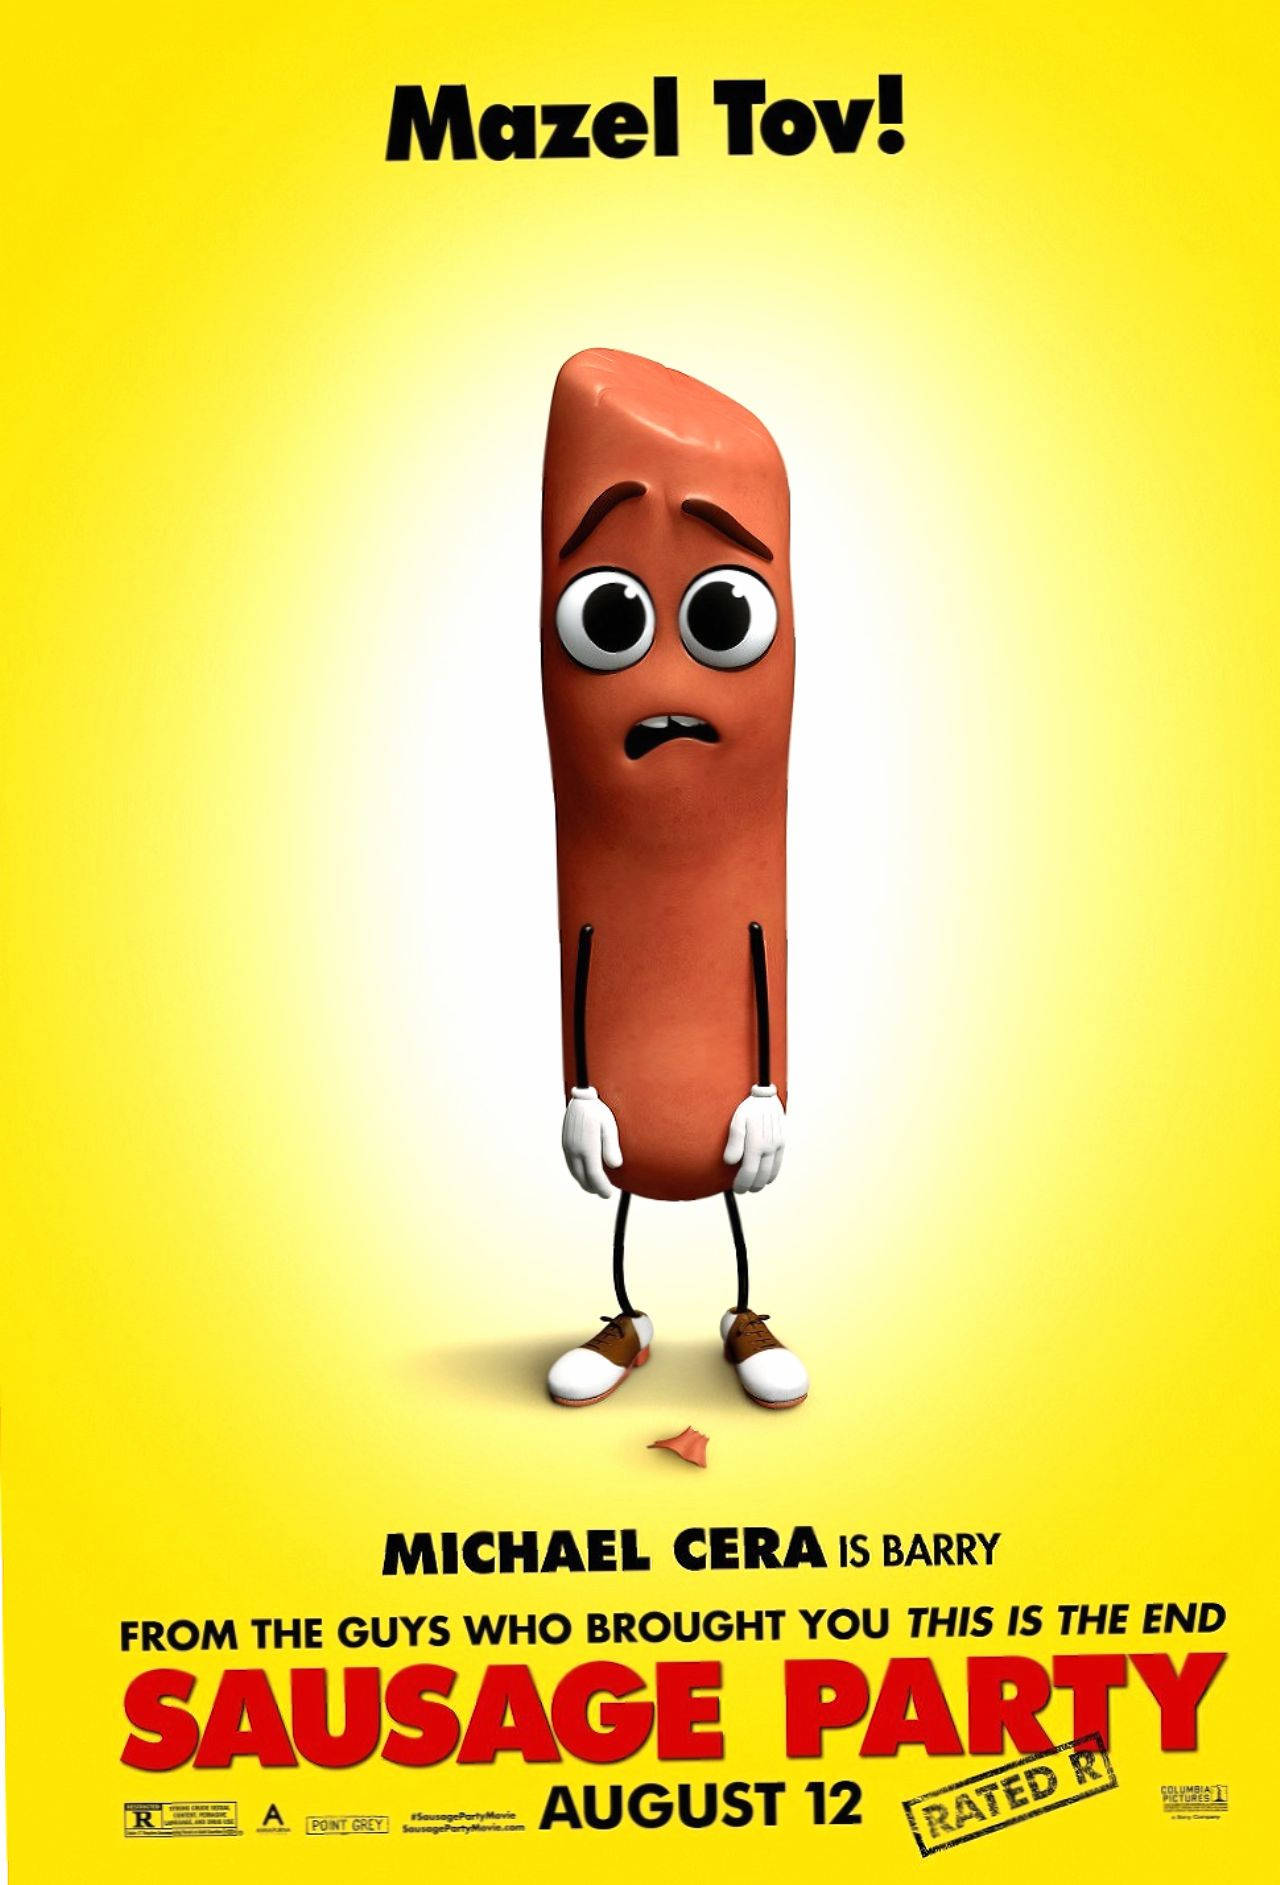 Barry Sausage Party Poster